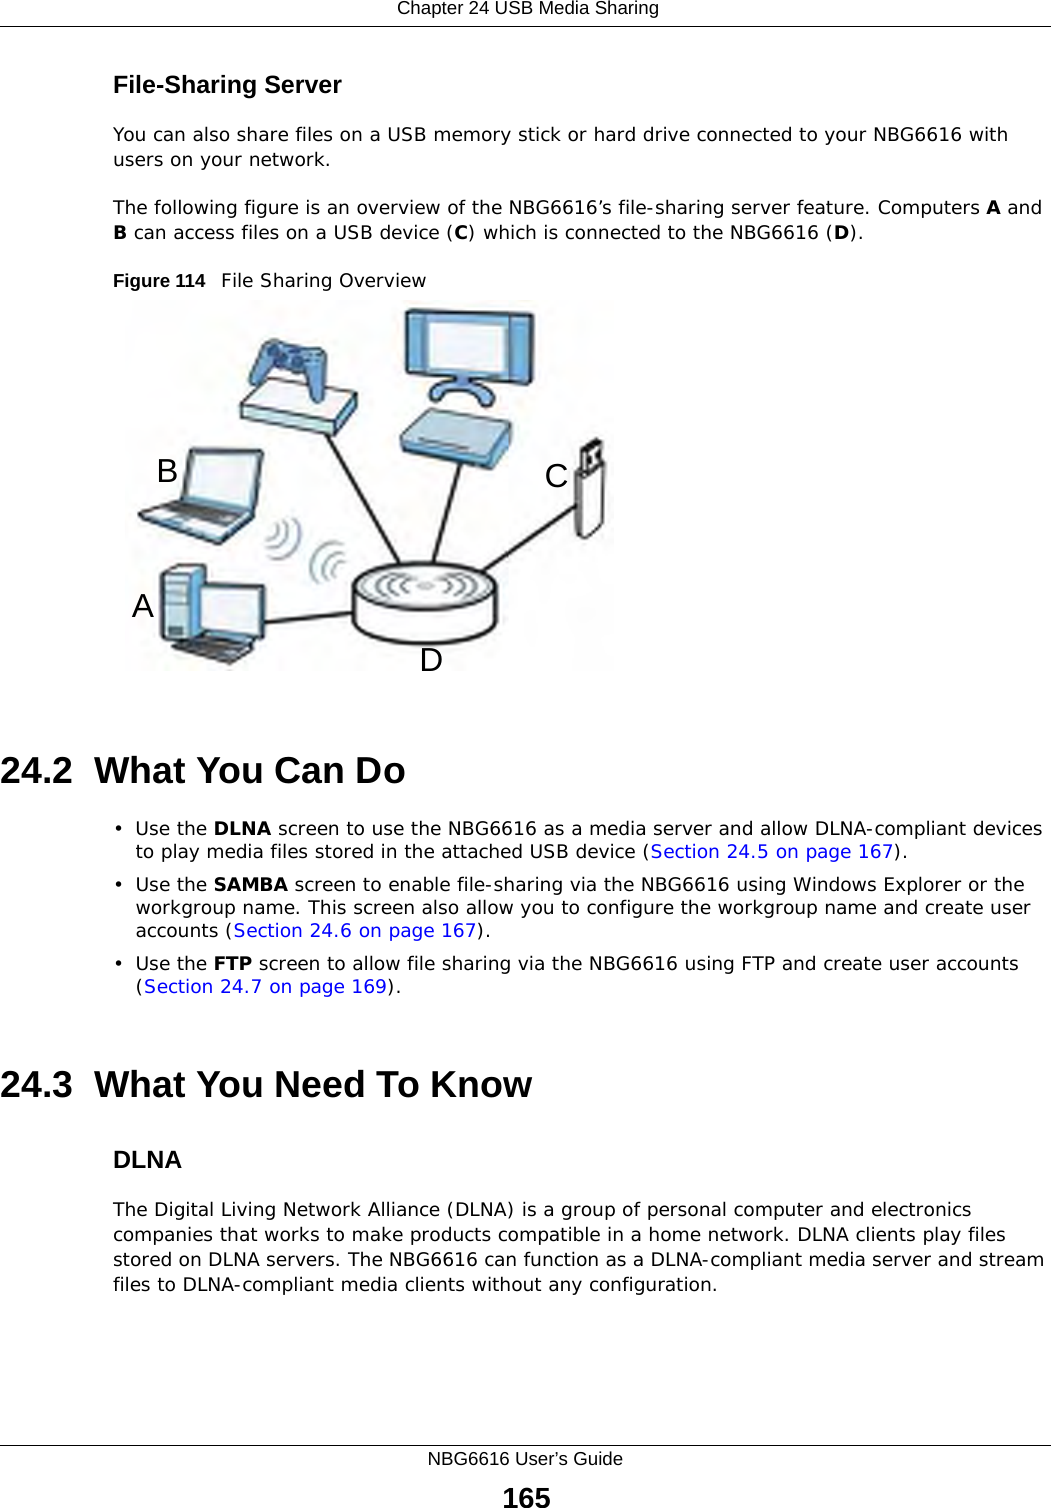  Chapter 24 USB Media SharingNBG6616 User’s Guide165File-Sharing ServerYou can also share files on a USB memory stick or hard drive connected to your NBG6616 with users on your network. The following figure is an overview of the NBG6616’s file-sharing server feature. Computers A and B can access files on a USB device (C) which is connected to the NBG6616 (D).Figure 114   File Sharing Overview24.2  What You Can Do•Use the DLNA screen to use the NBG6616 as a media server and allow DLNA-compliant devices to play media files stored in the attached USB device (Section 24.5 on page 167).•Use the SAMBA screen to enable file-sharing via the NBG6616 using Windows Explorer or the workgroup name. This screen also allow you to configure the workgroup name and create user accounts (Section 24.6 on page 167).•Use the FTP screen to allow file sharing via the NBG6616 using FTP and create user accounts (Section 24.7 on page 169).24.3  What You Need To KnowDLNAThe Digital Living Network Alliance (DLNA) is a group of personal computer and electronics companies that works to make products compatible in a home network. DLNA clients play files stored on DLNA servers. The NBG6616 can function as a DLNA-compliant media server and stream files to DLNA-compliant media clients without any configuration. ABCD